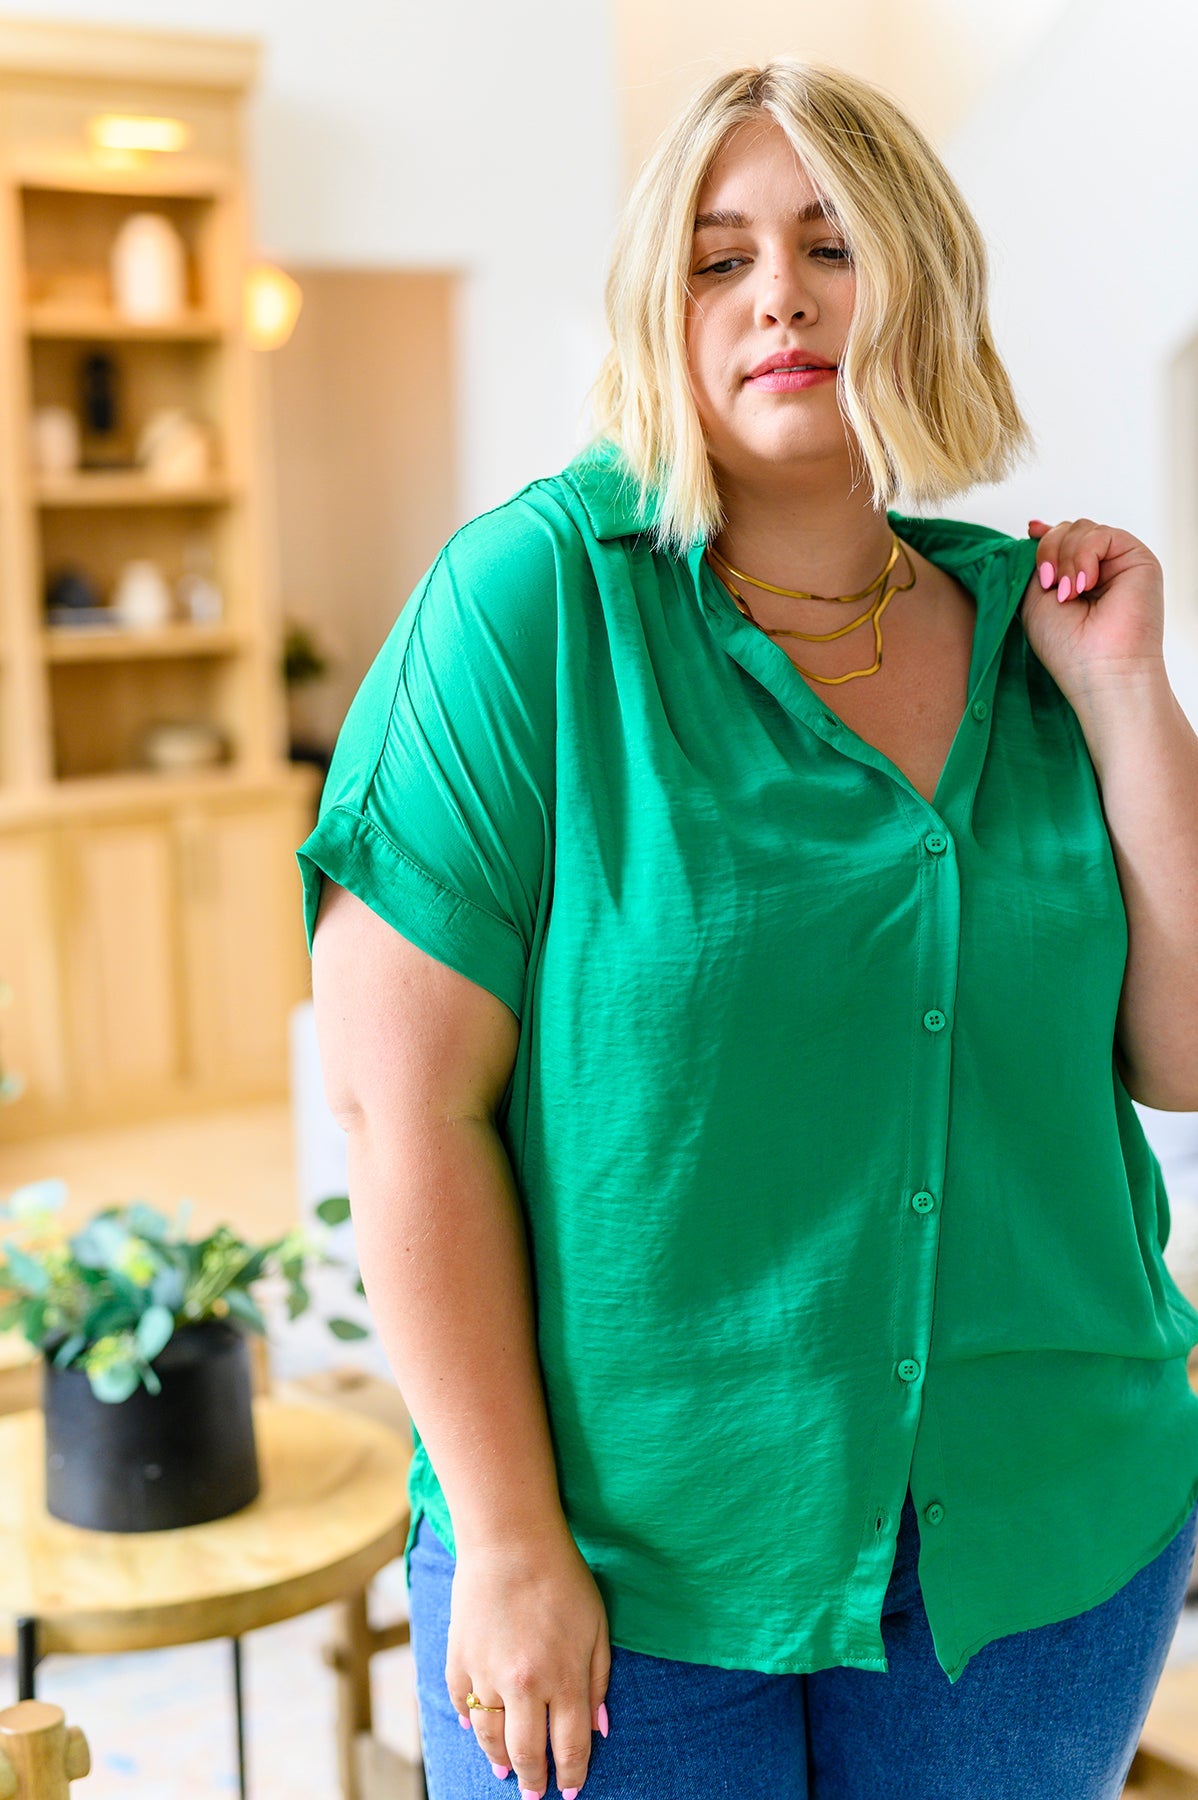 Brand Collab Working On Me Top in Kelly Green